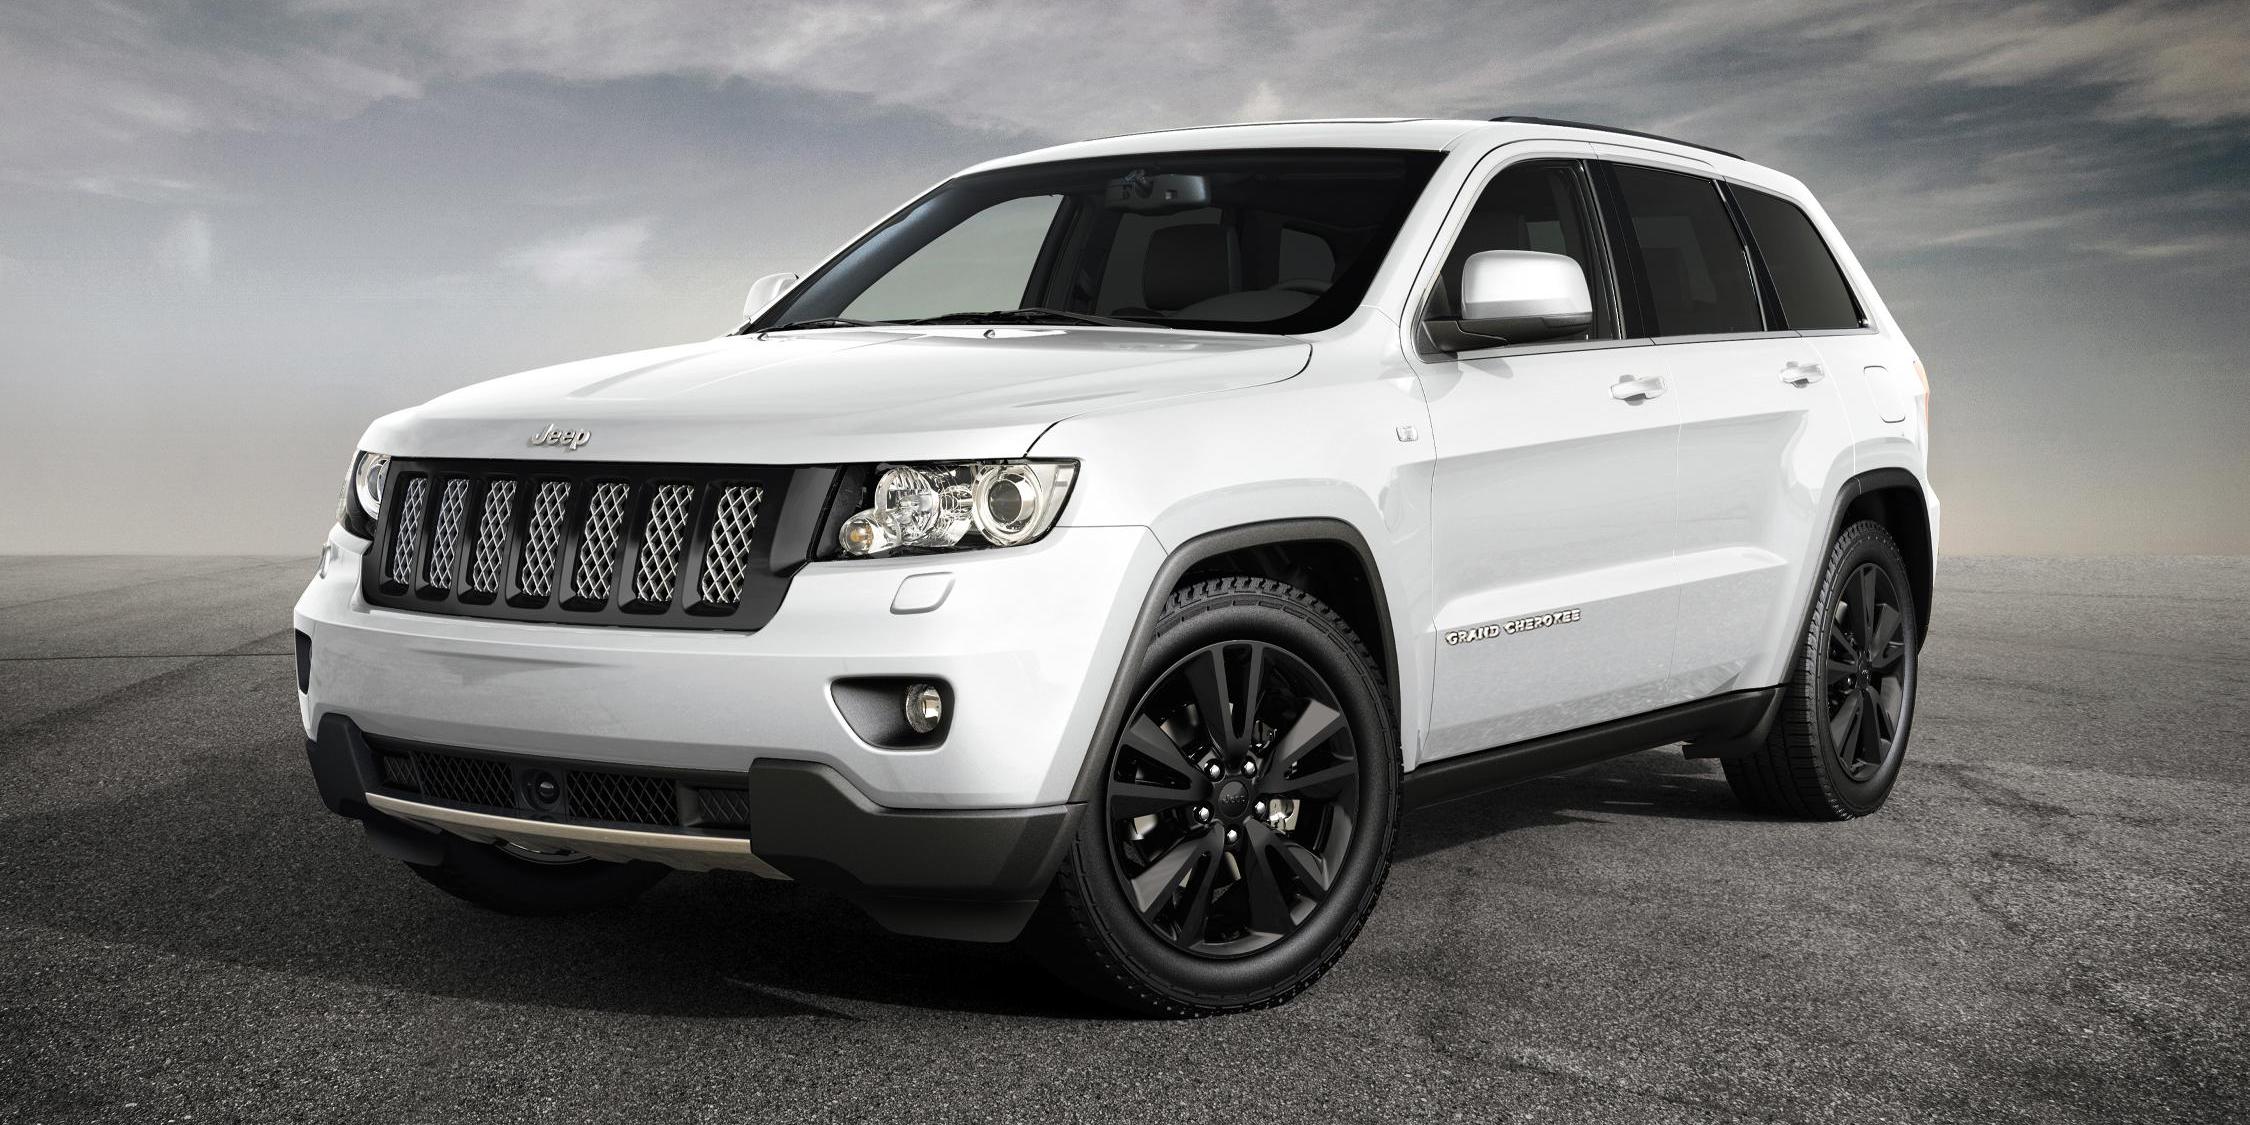 Jeep unveils new Sporting new model